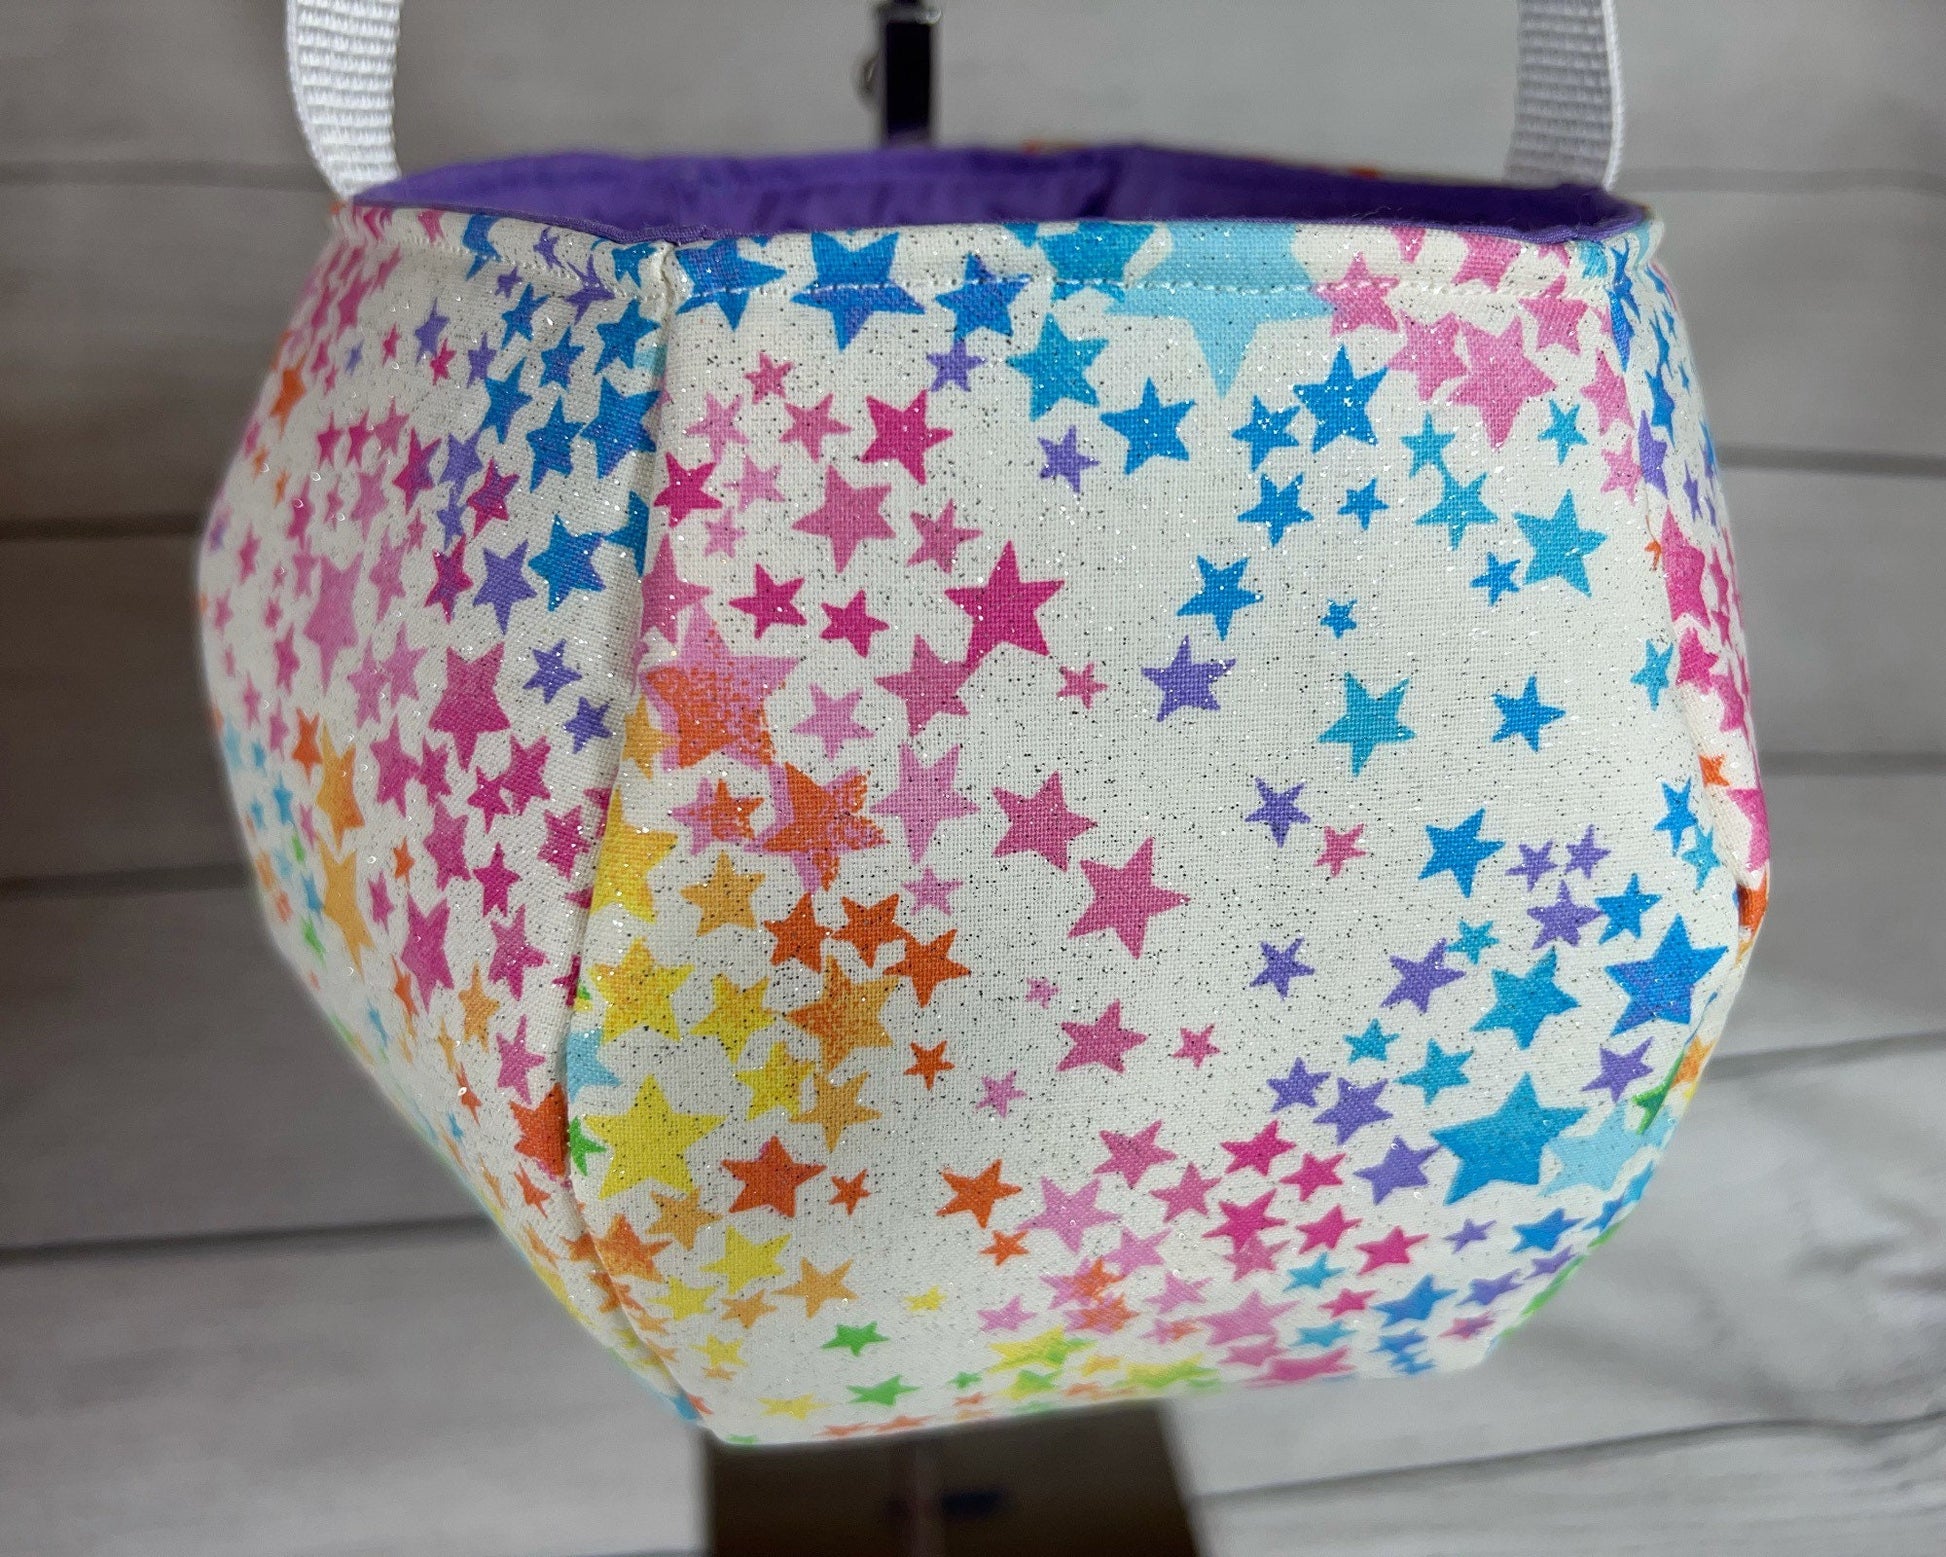 Rainbow Sparkle Star Way Bag - Bag - Tote - Silver Glitter - Fun - Multi-Colored - Everyday - Holiday - Easter - Halloween - Party - Gift